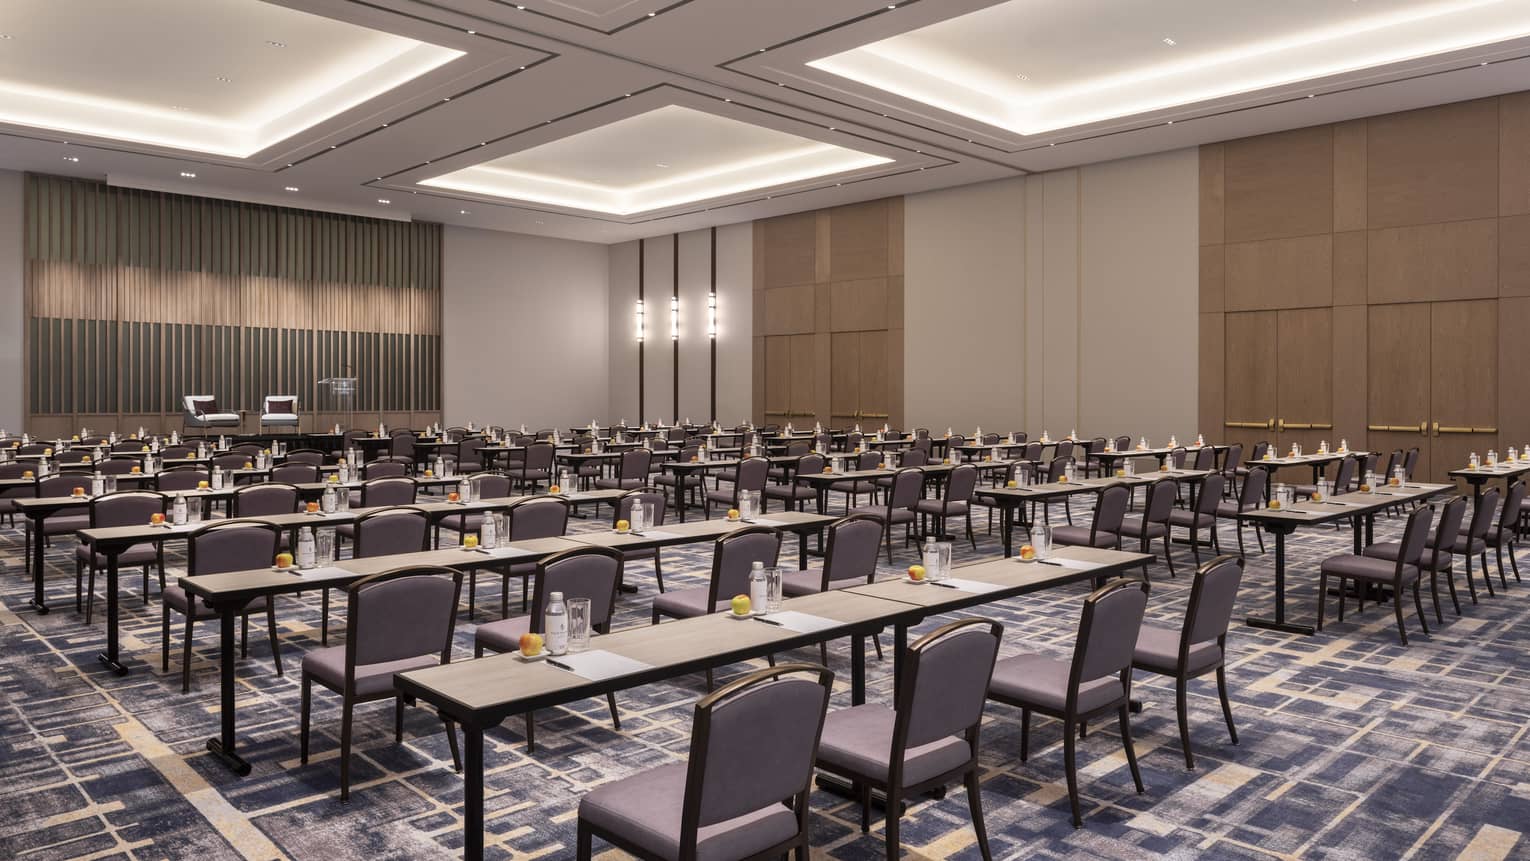 A large meeting room with longe tables and chairs facing a one side of the space.